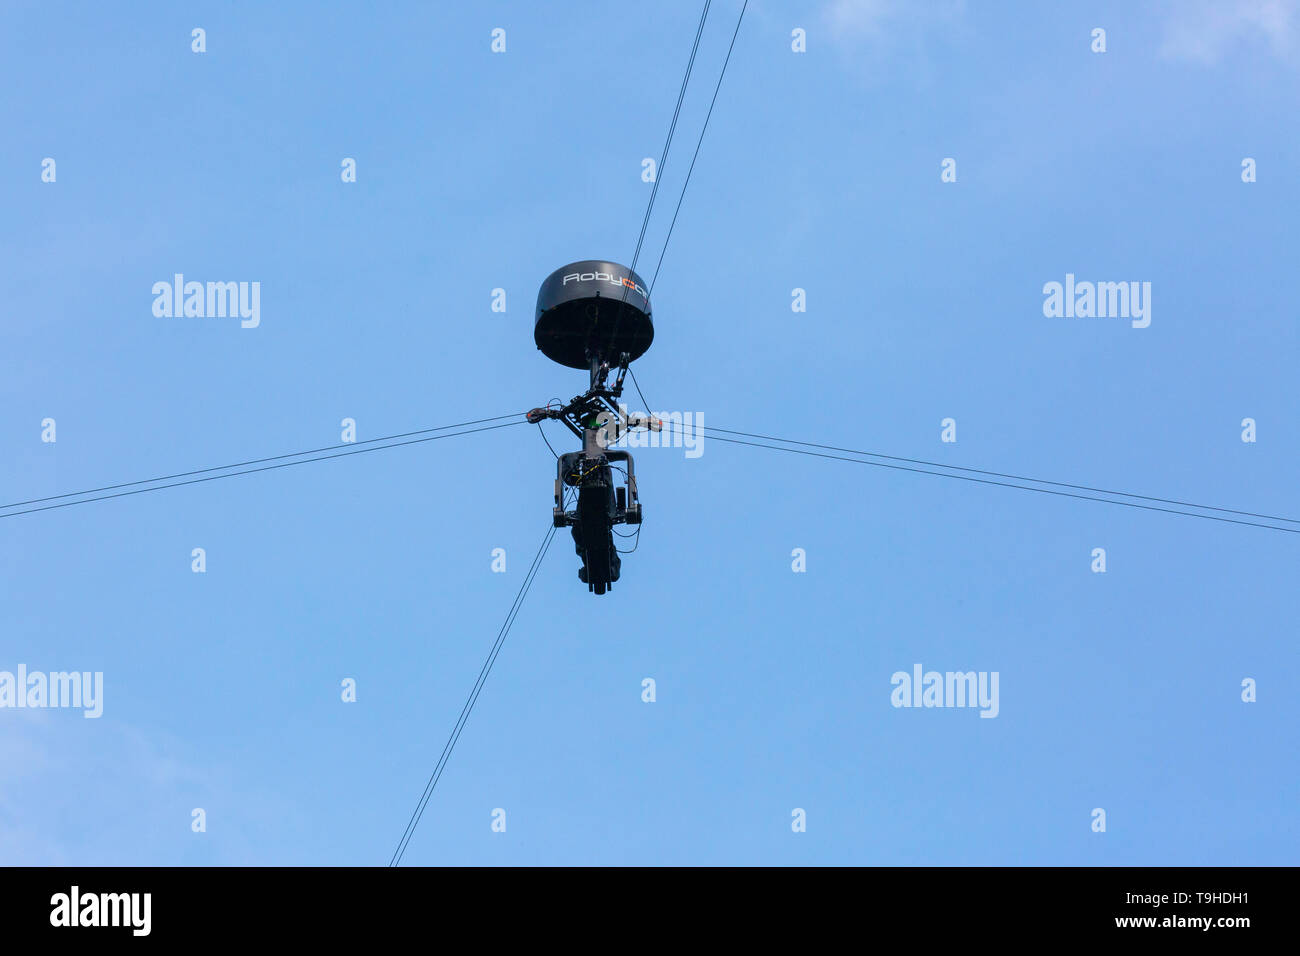 Skycam High Resolution Stock Photography And Images Alamy